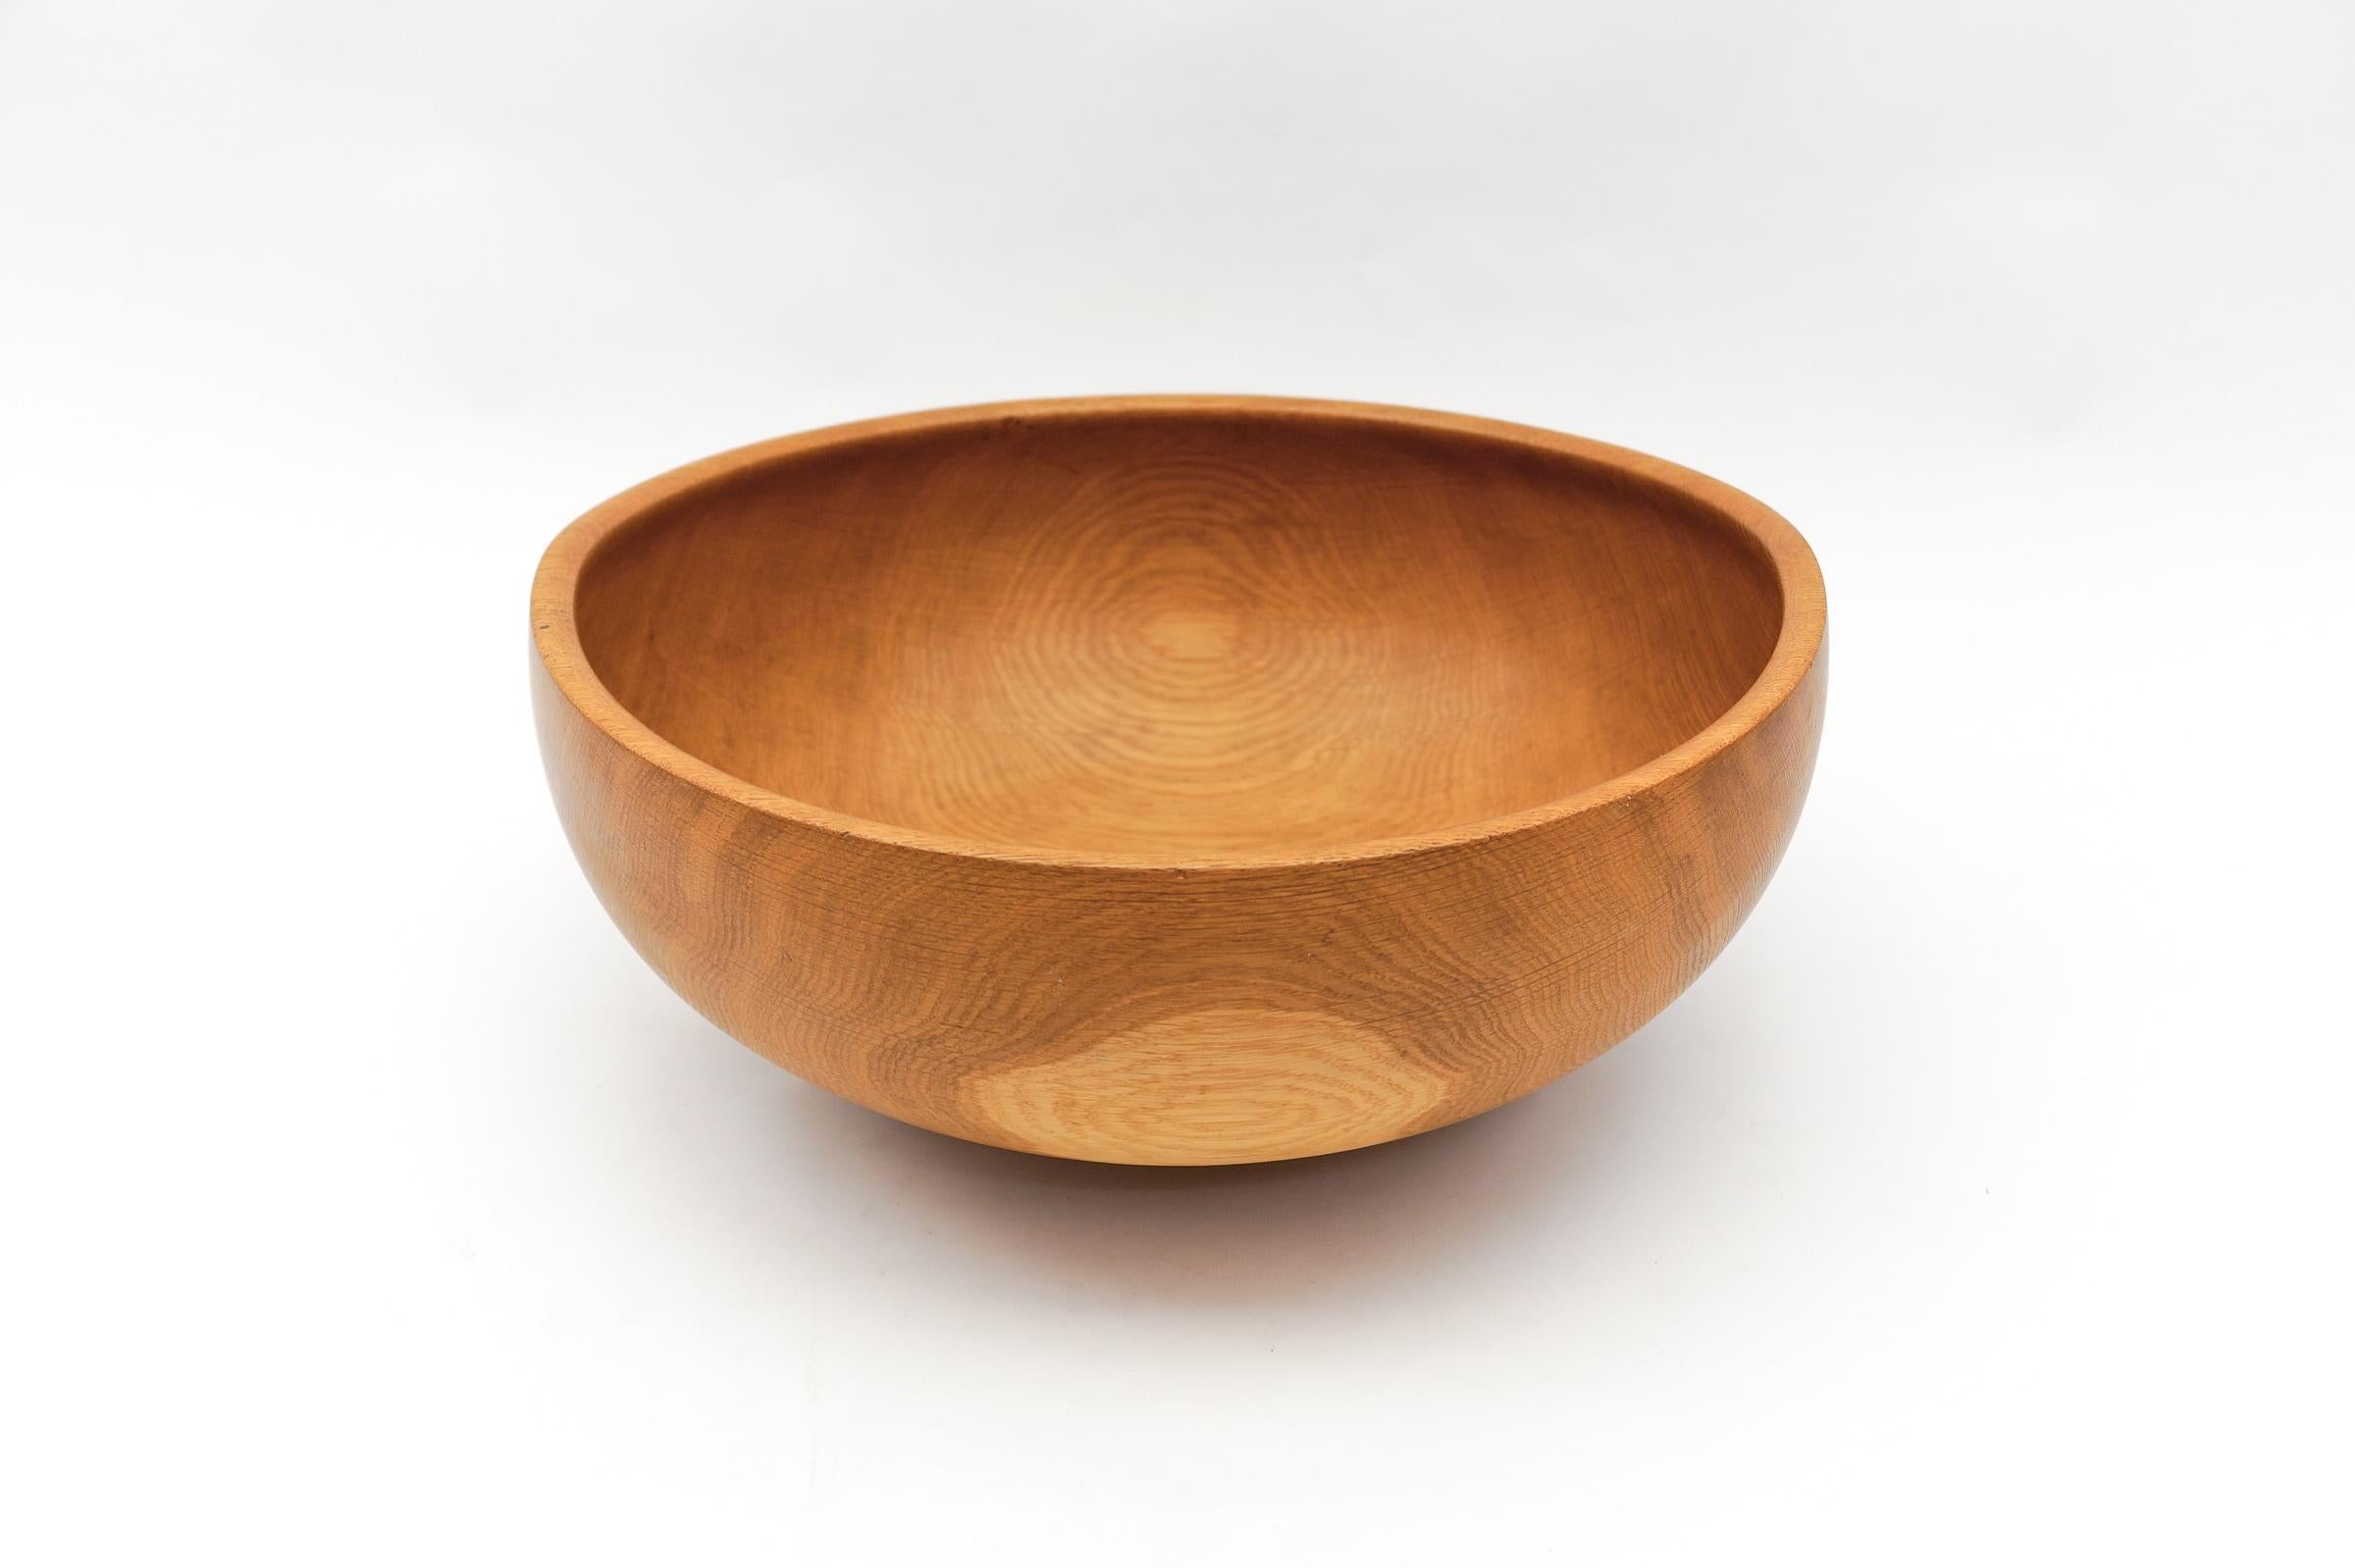 Awesome Huge Mid-Century Modern Oak Bowl by K. Weichselbaum, 1999 Germany For Sale 9